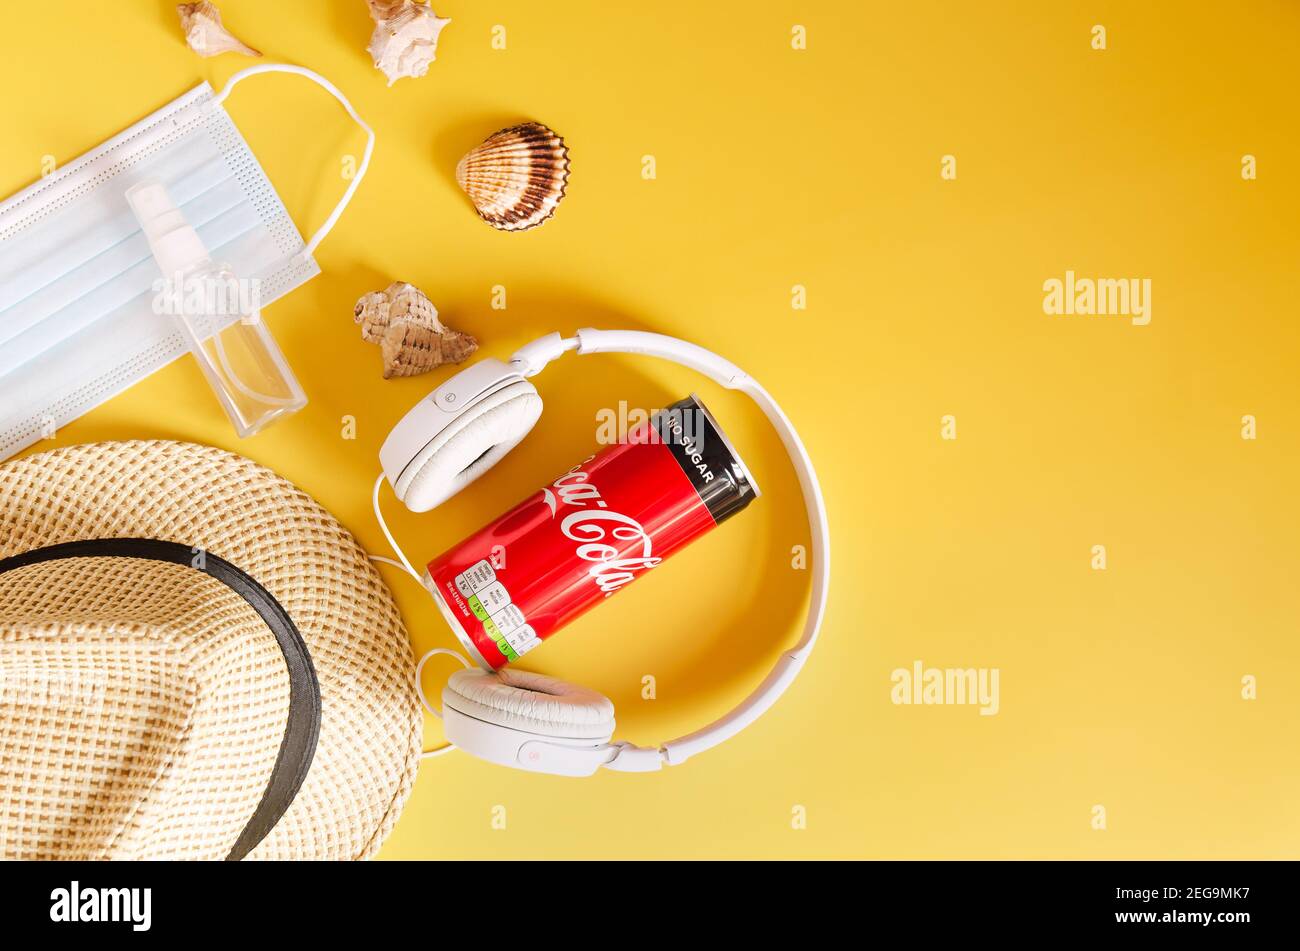 Travel under Covid-19 and new normal concepts. Top view of white headphones, can of Coca- Cola, phone and beach hat on yellow background close up Stock Photo